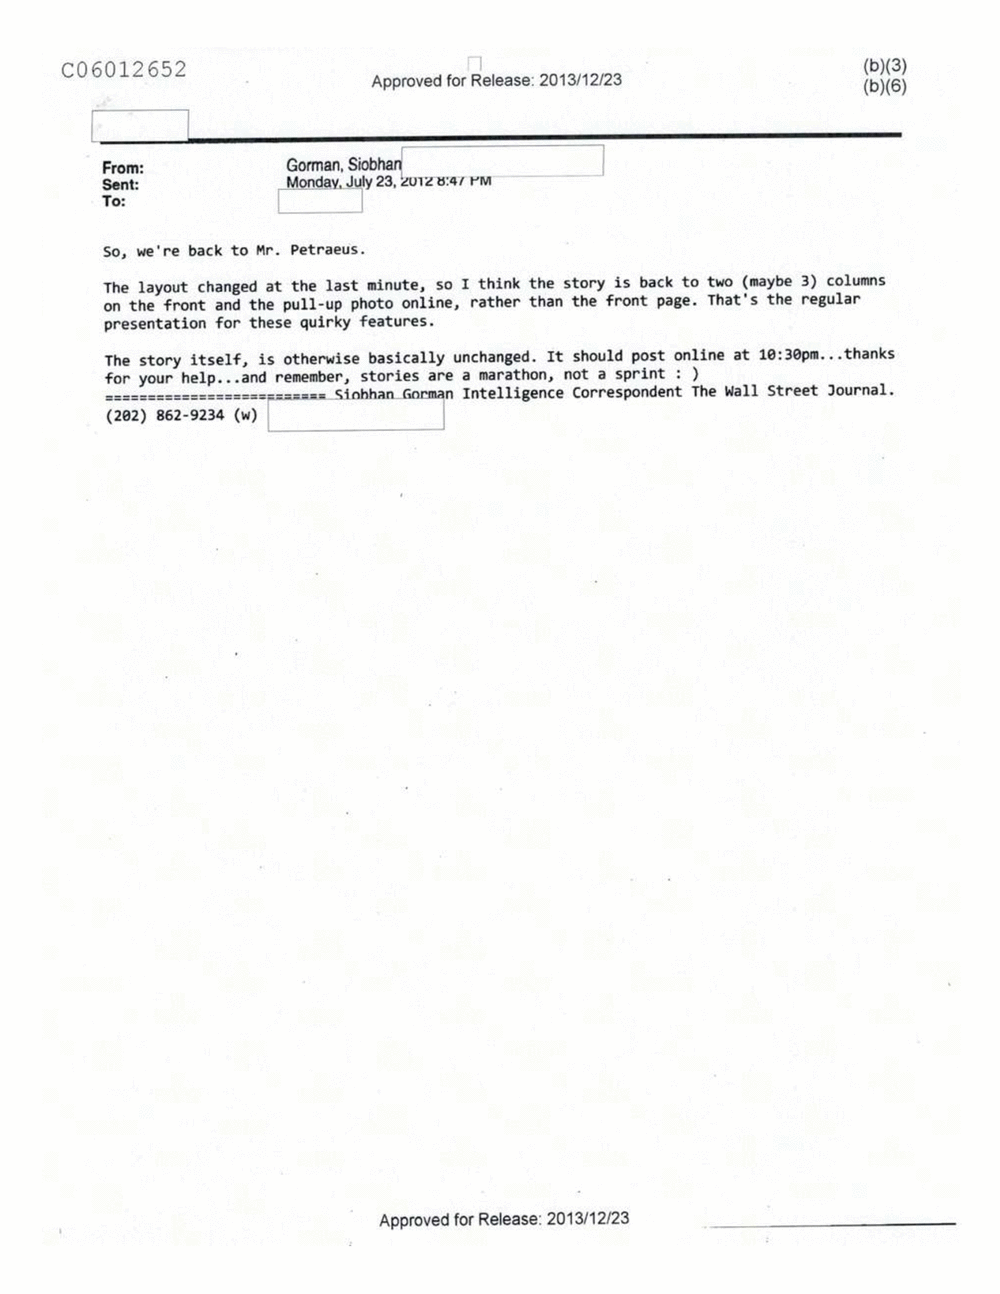 Page 228 from Email Correspondence Between Reporters and CIA Flacks